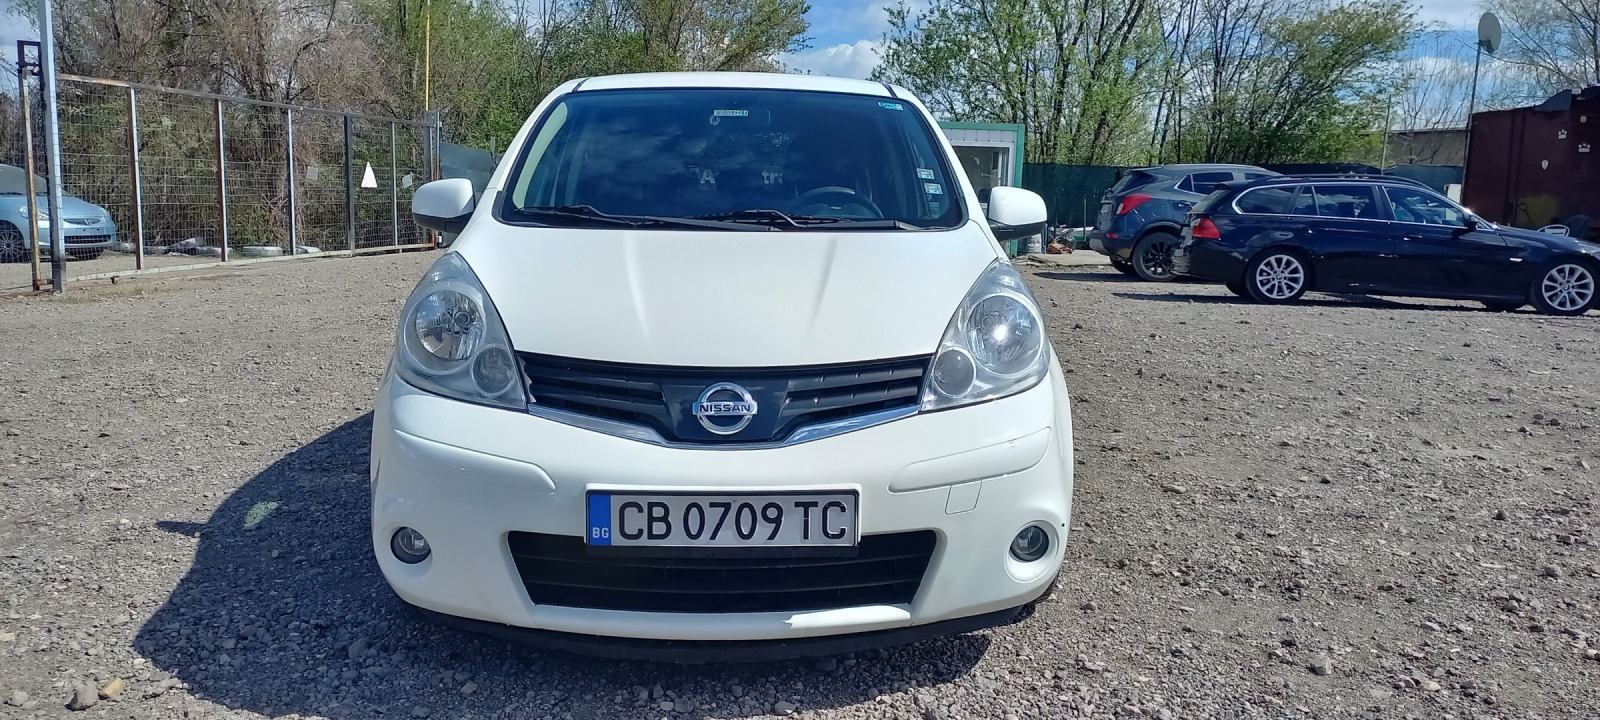 Nissan Note 1.4 - [1] 